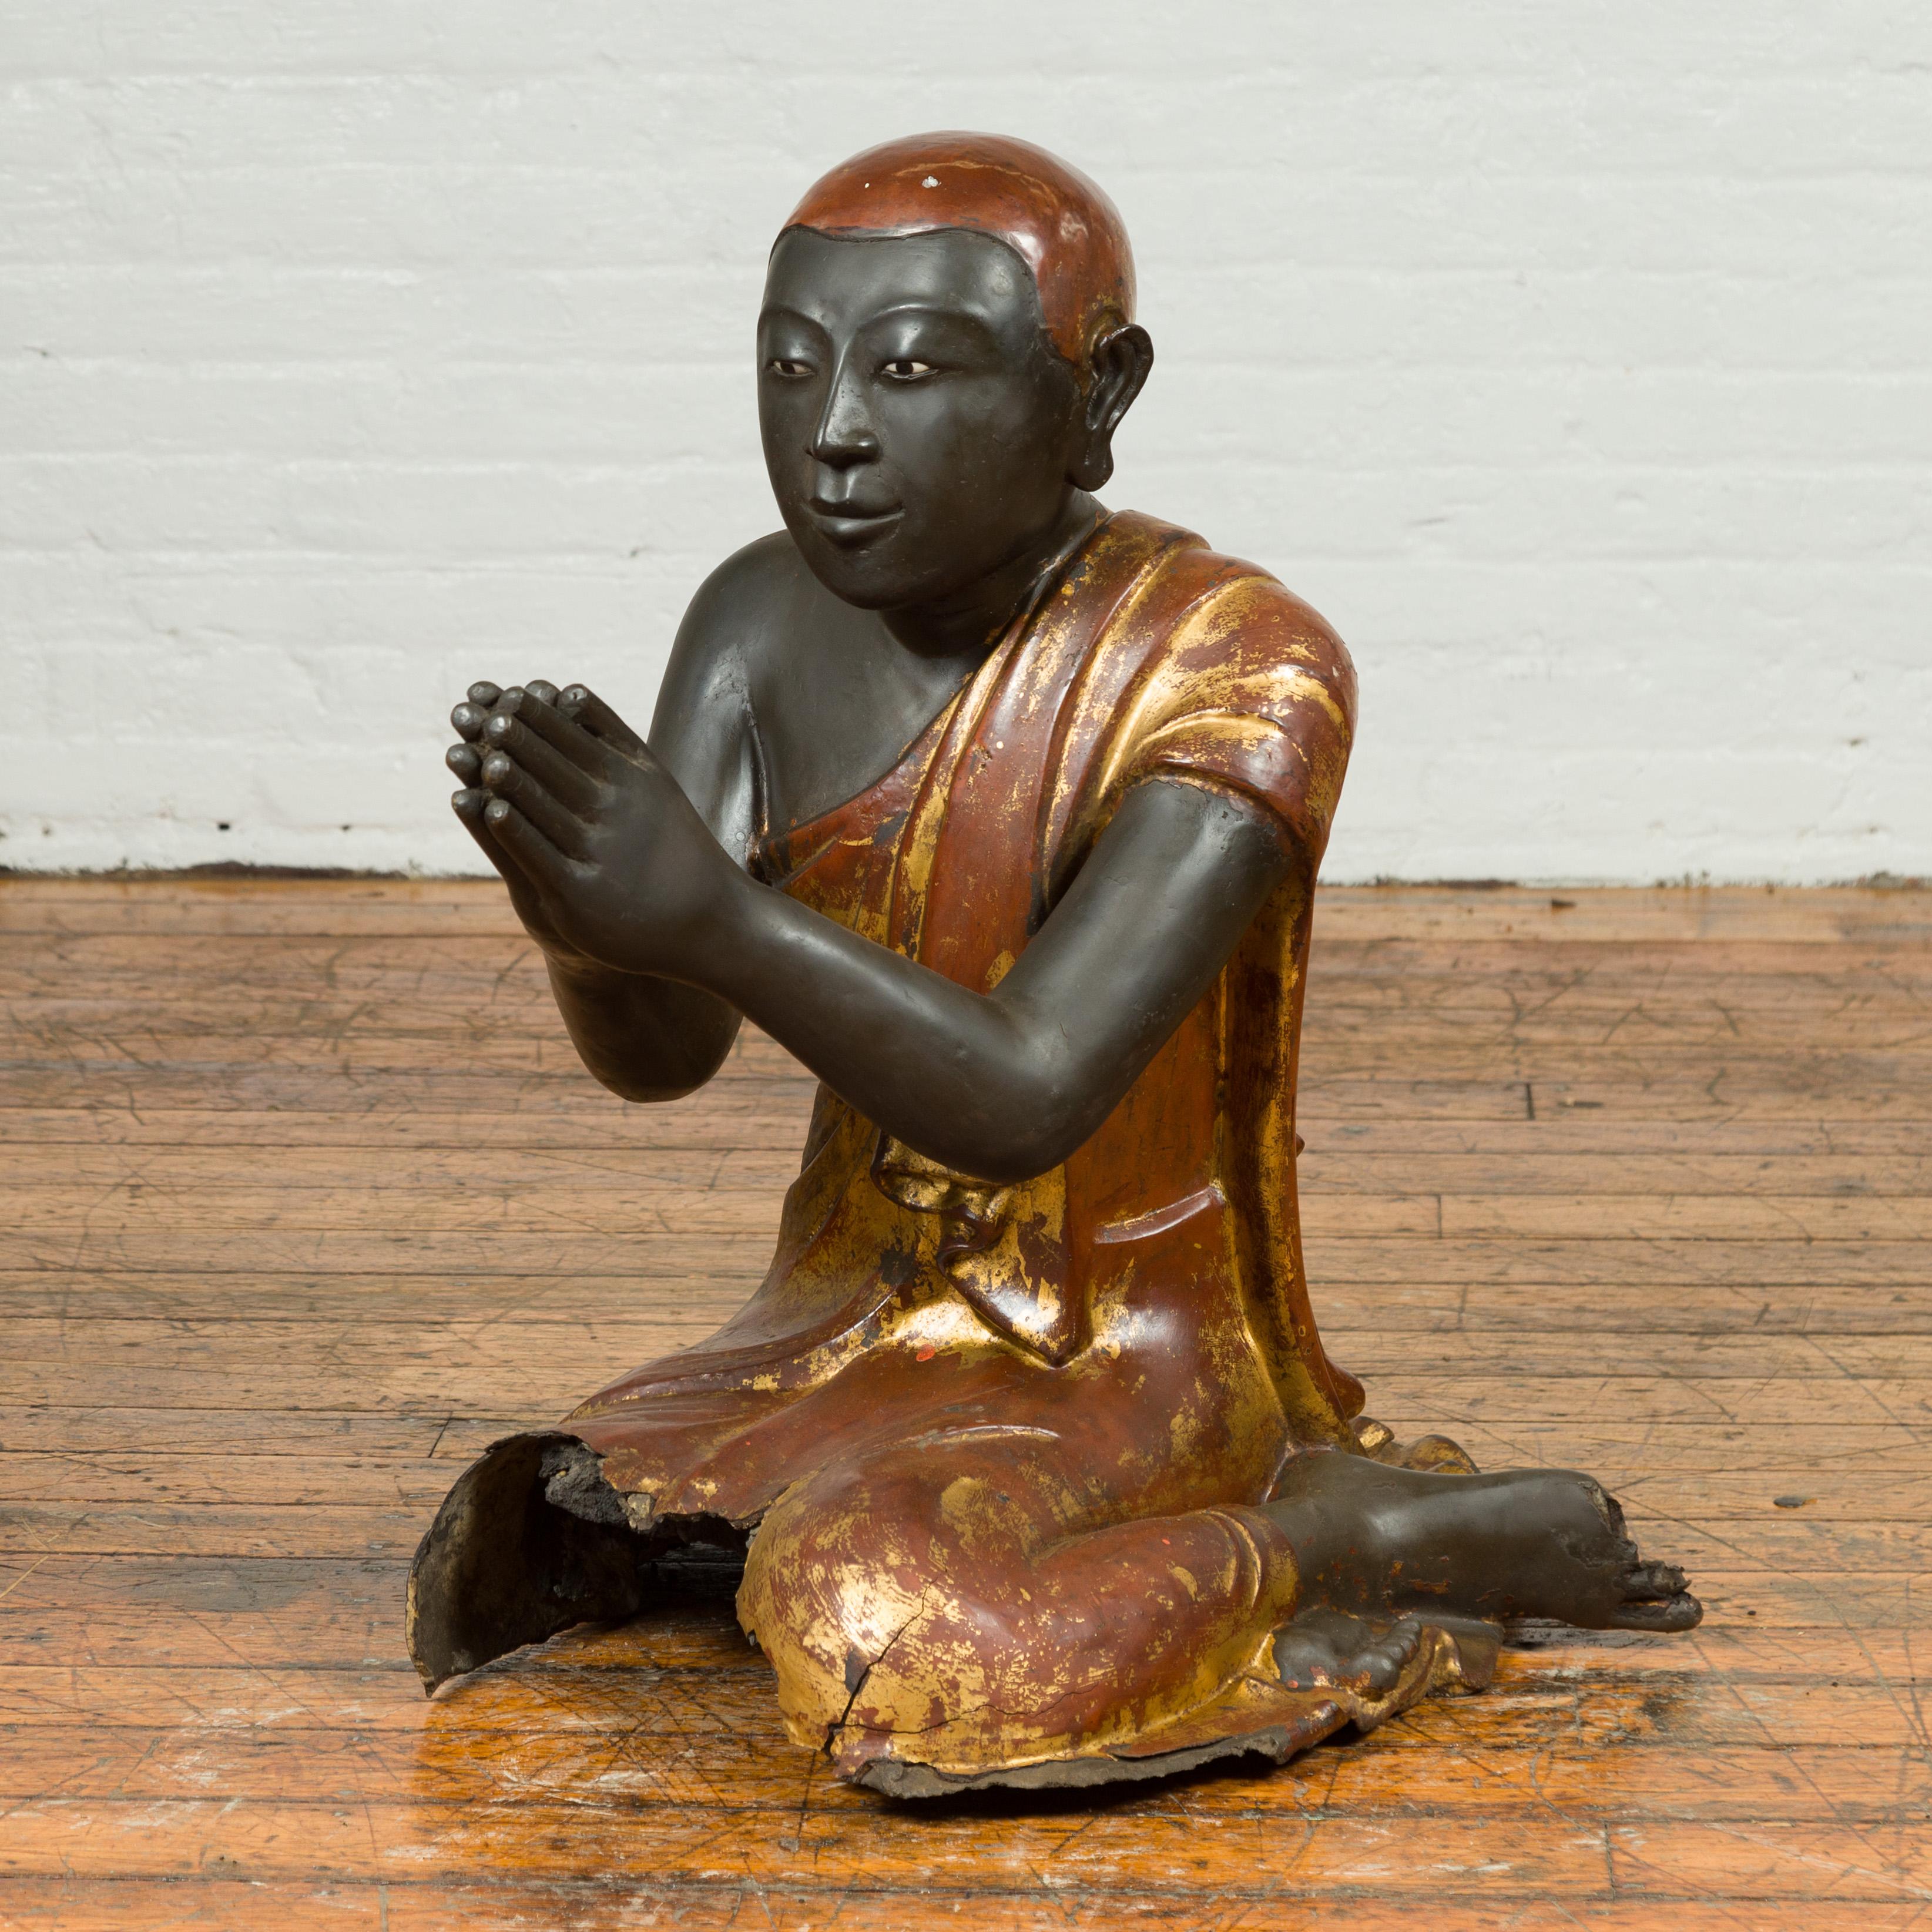 A Thai kneeling ceremonial monk sculpture from the 20th century with hand painted gilt and lacquer over stone. Found in a Thai temple, this ceremonial kneeling monk is a rare object. Boasting a superb contrast of colors between his dark skin and the